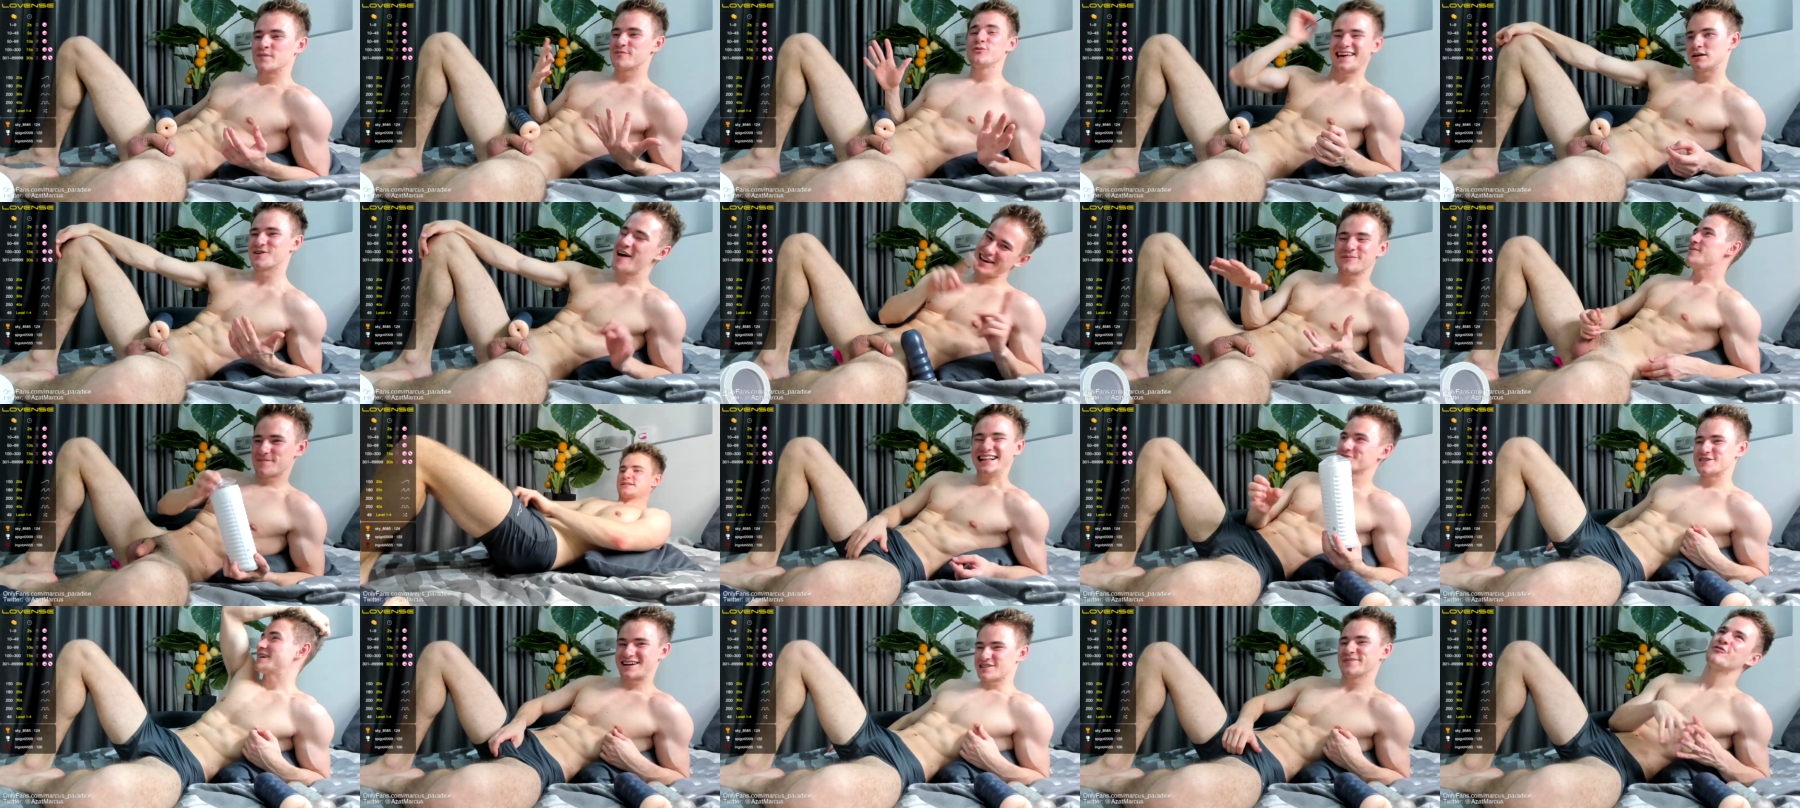 Marcus_Paradise  15-10-2021 video pvt anal